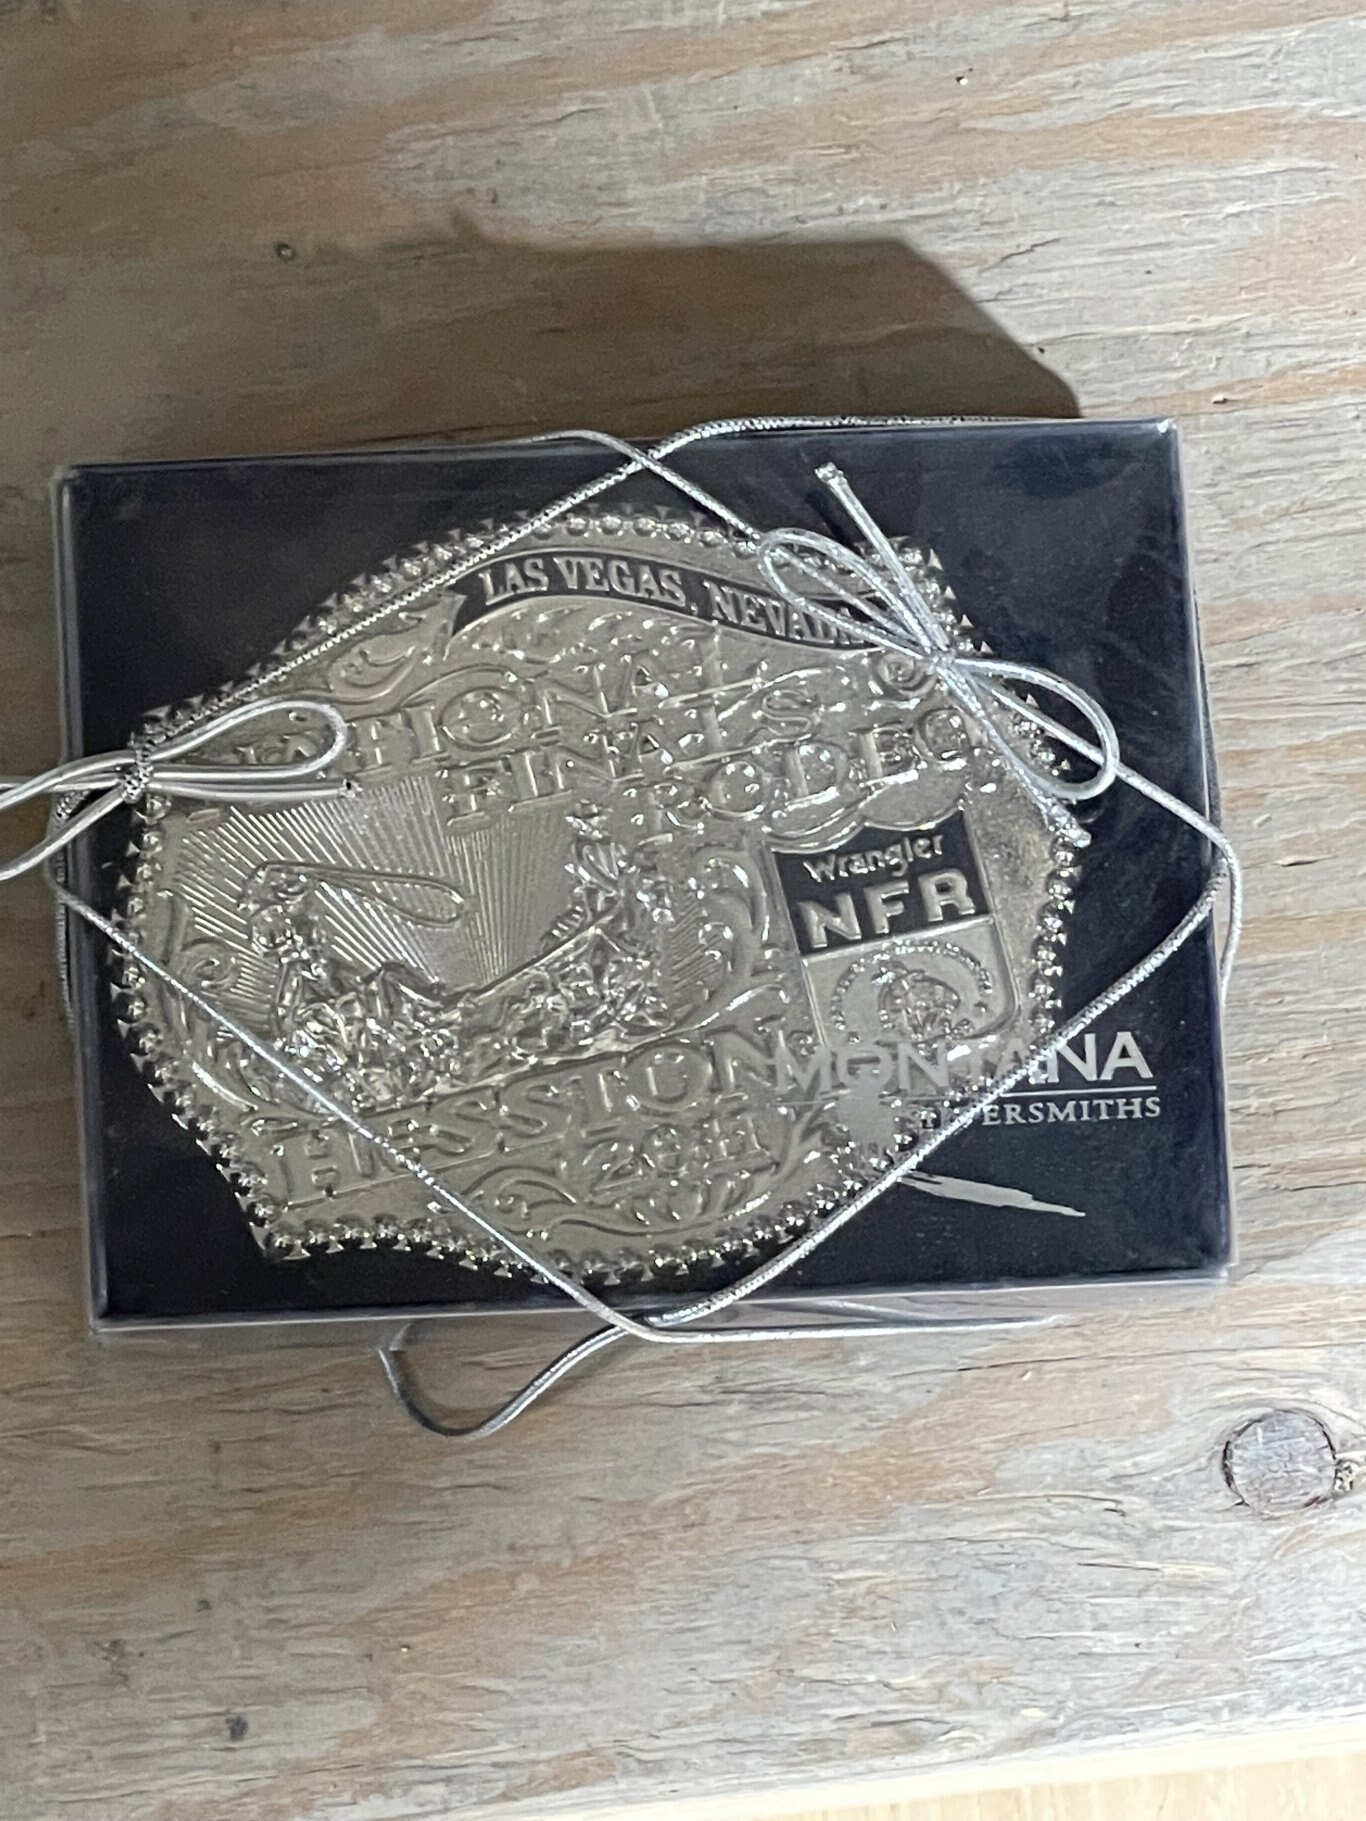 Hesston National Finals Rodeo Belt Buckles in Silver 2011 Large